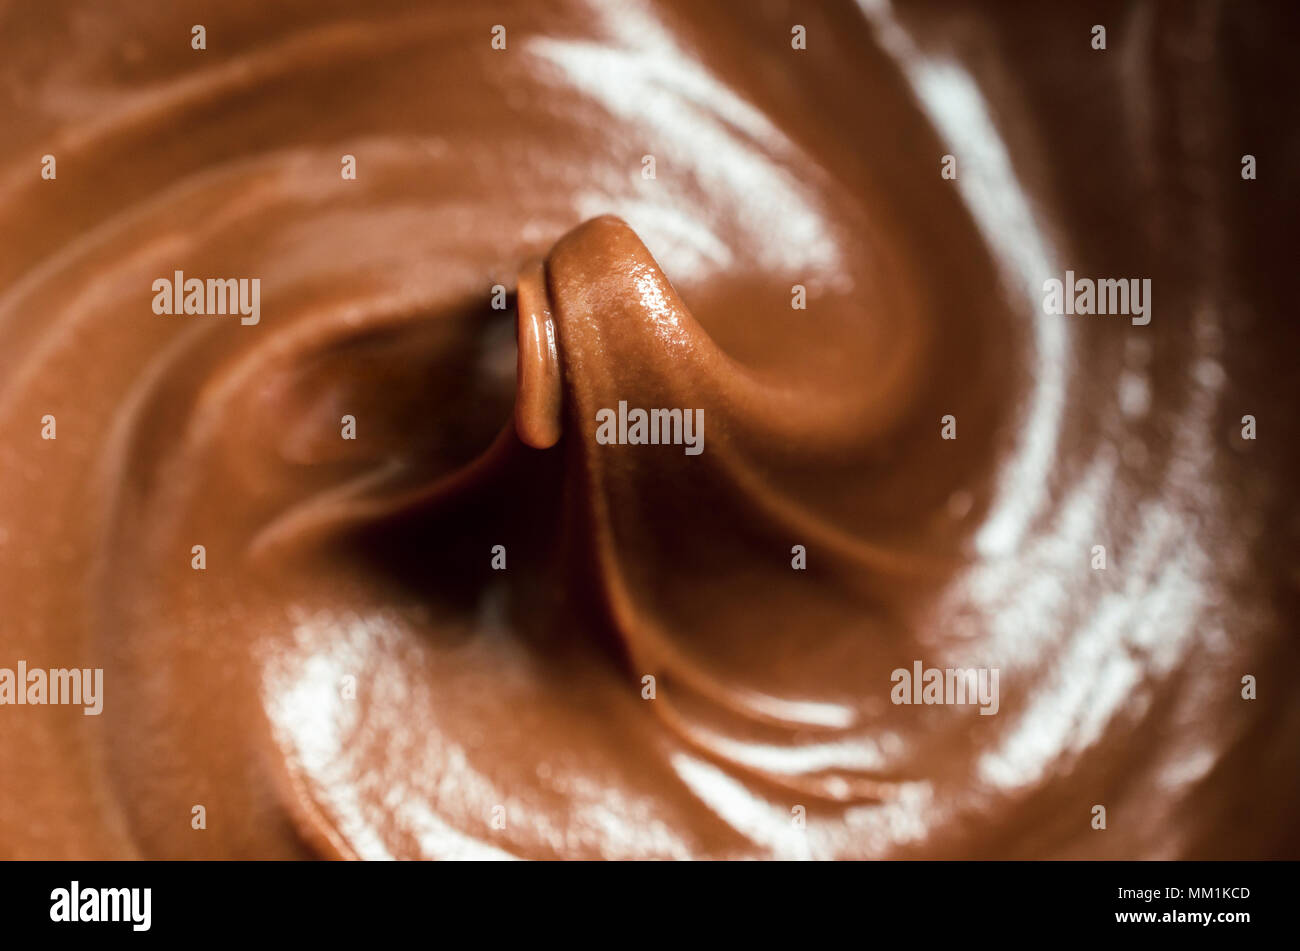 Close up (macro) of melting milk chocolate, stirred into swirls with rising peak in middle of frame. Shallow depth of field. Stock Photo